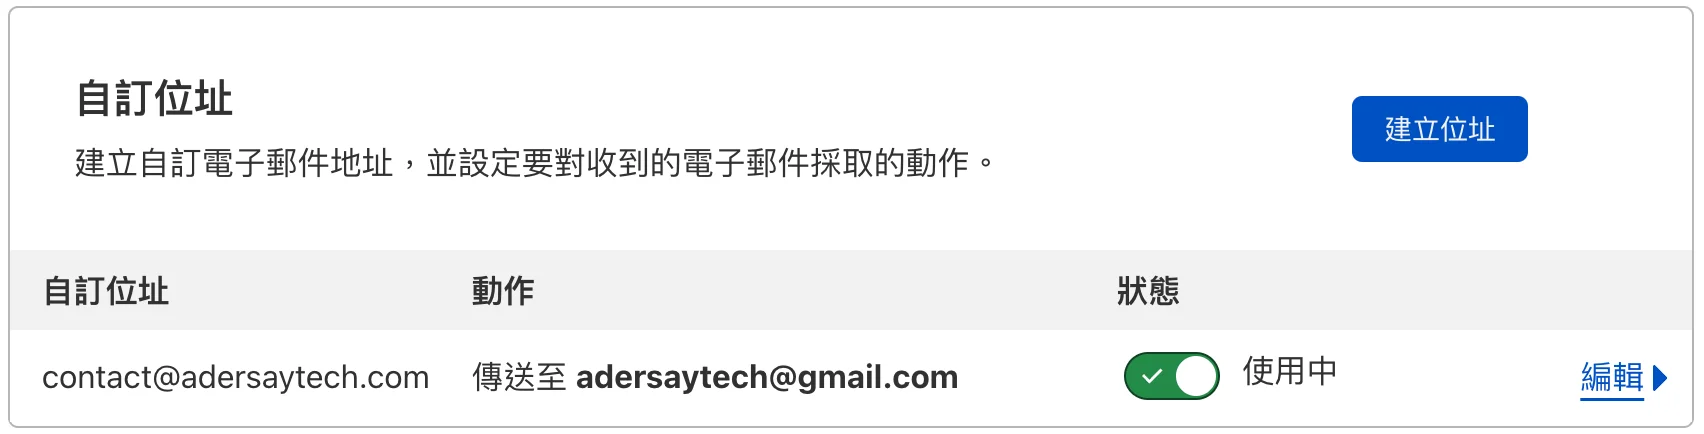 Cloudflare Email Routing 電子郵件路由，可免費自訂網域信箱！ 23